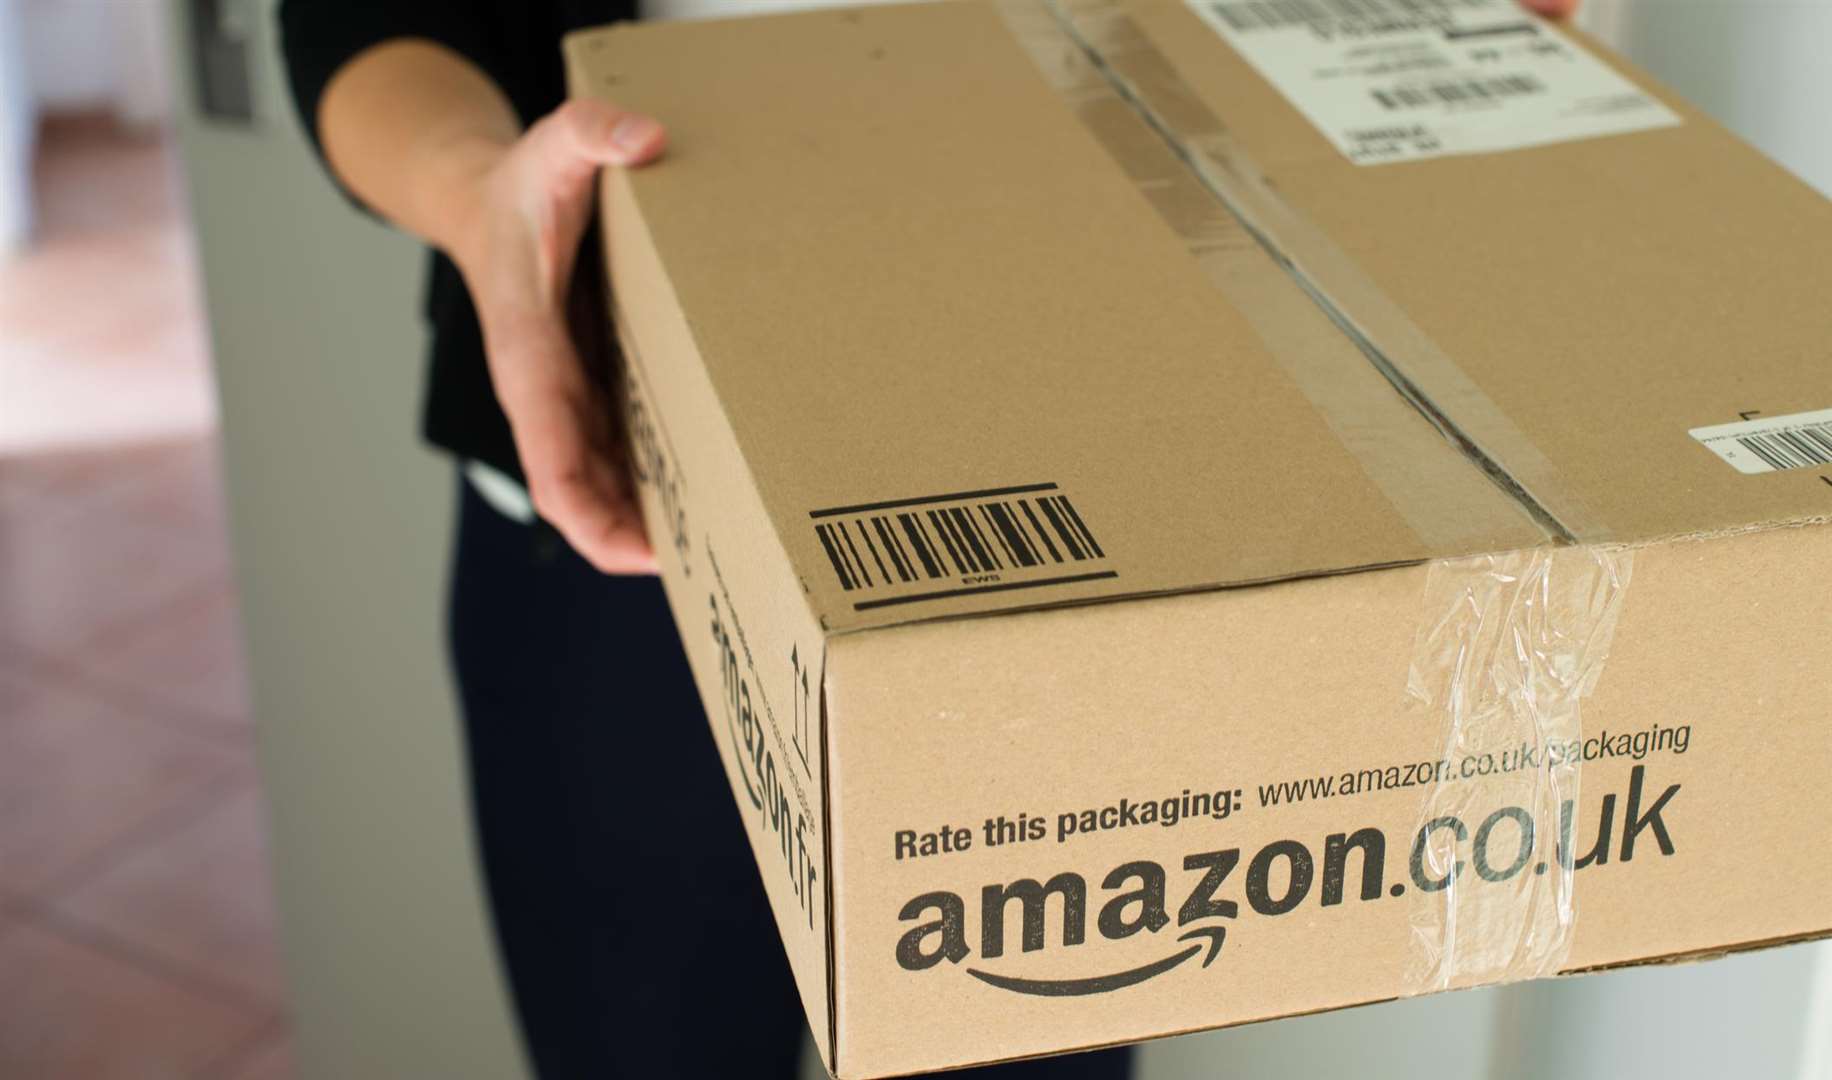 Amazon is set for big business on Prime Day and has been rolling out lightning deals ahead of its summer sale